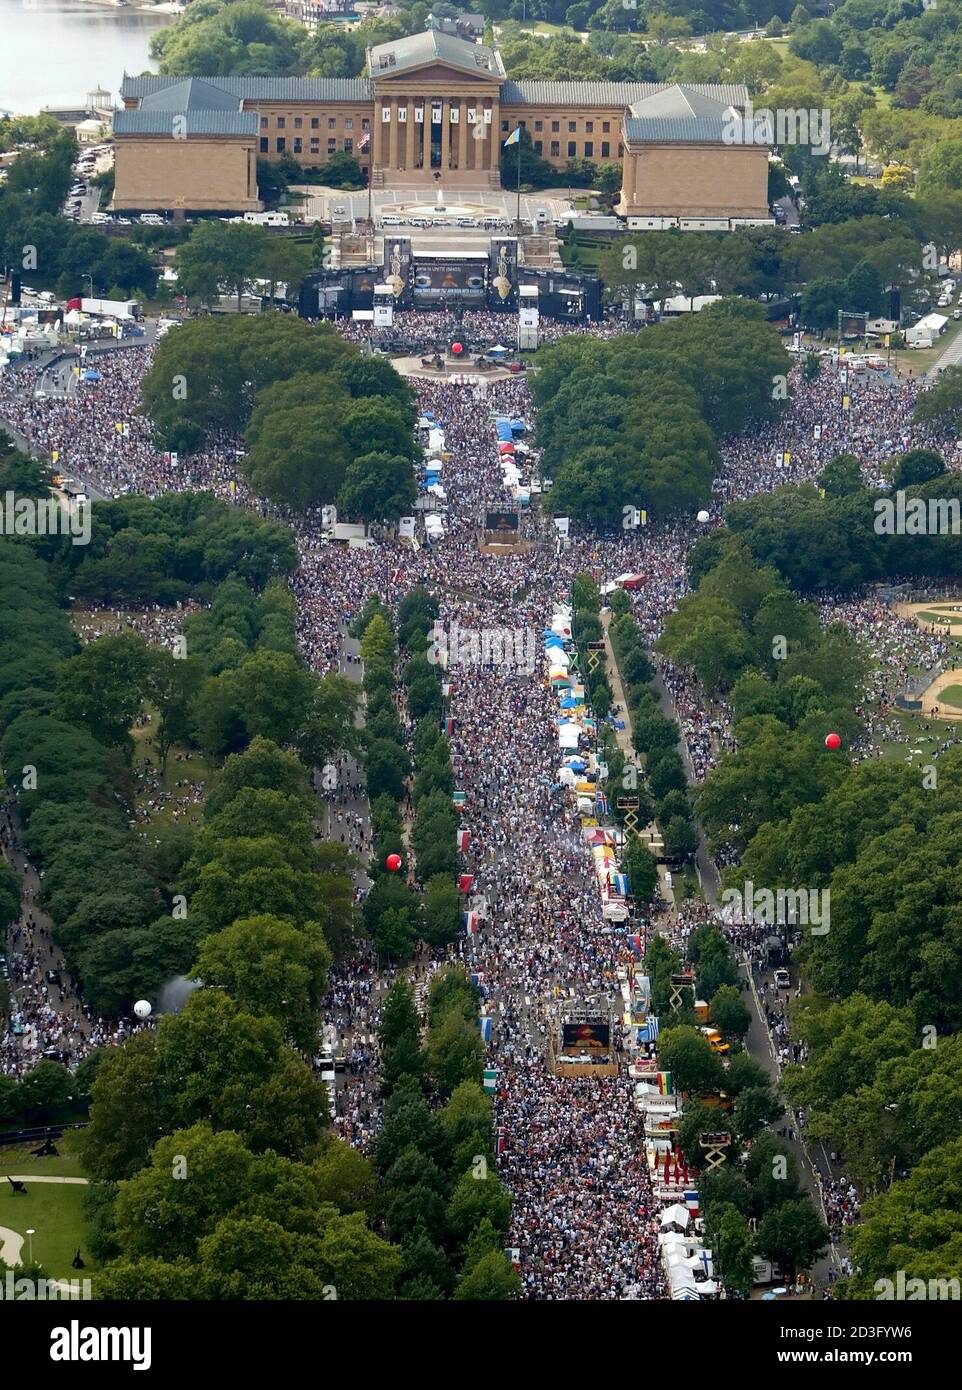 An aerial view of the Live 8 concert in Philadelphia July 2, 2005 